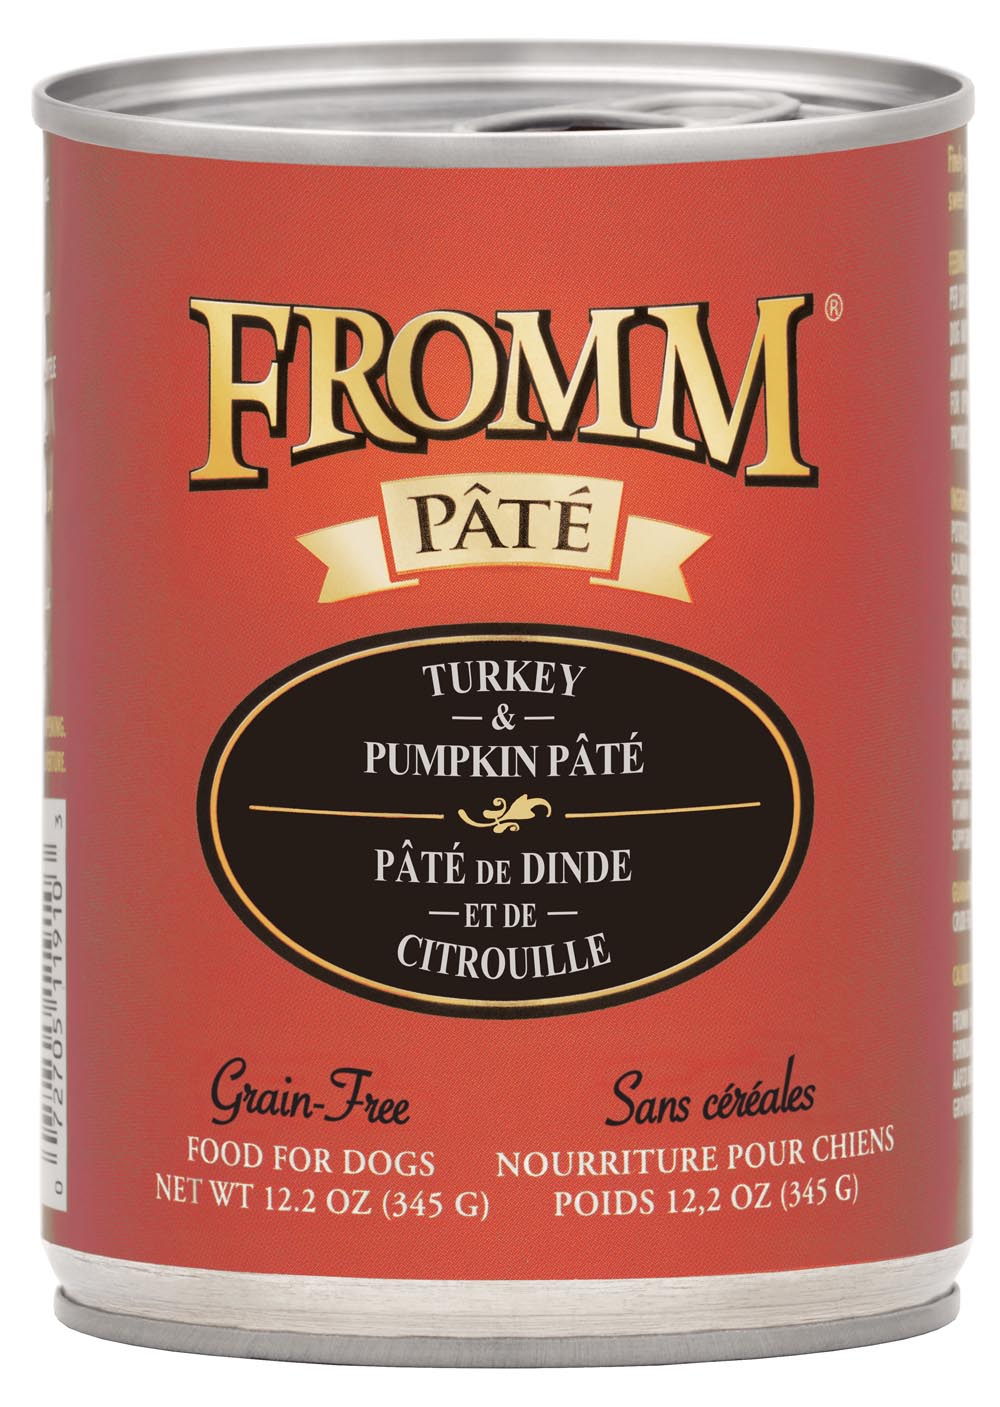 Fromm Turkey & Pumpkin Pate Food for Dogs, 12.2 OZ